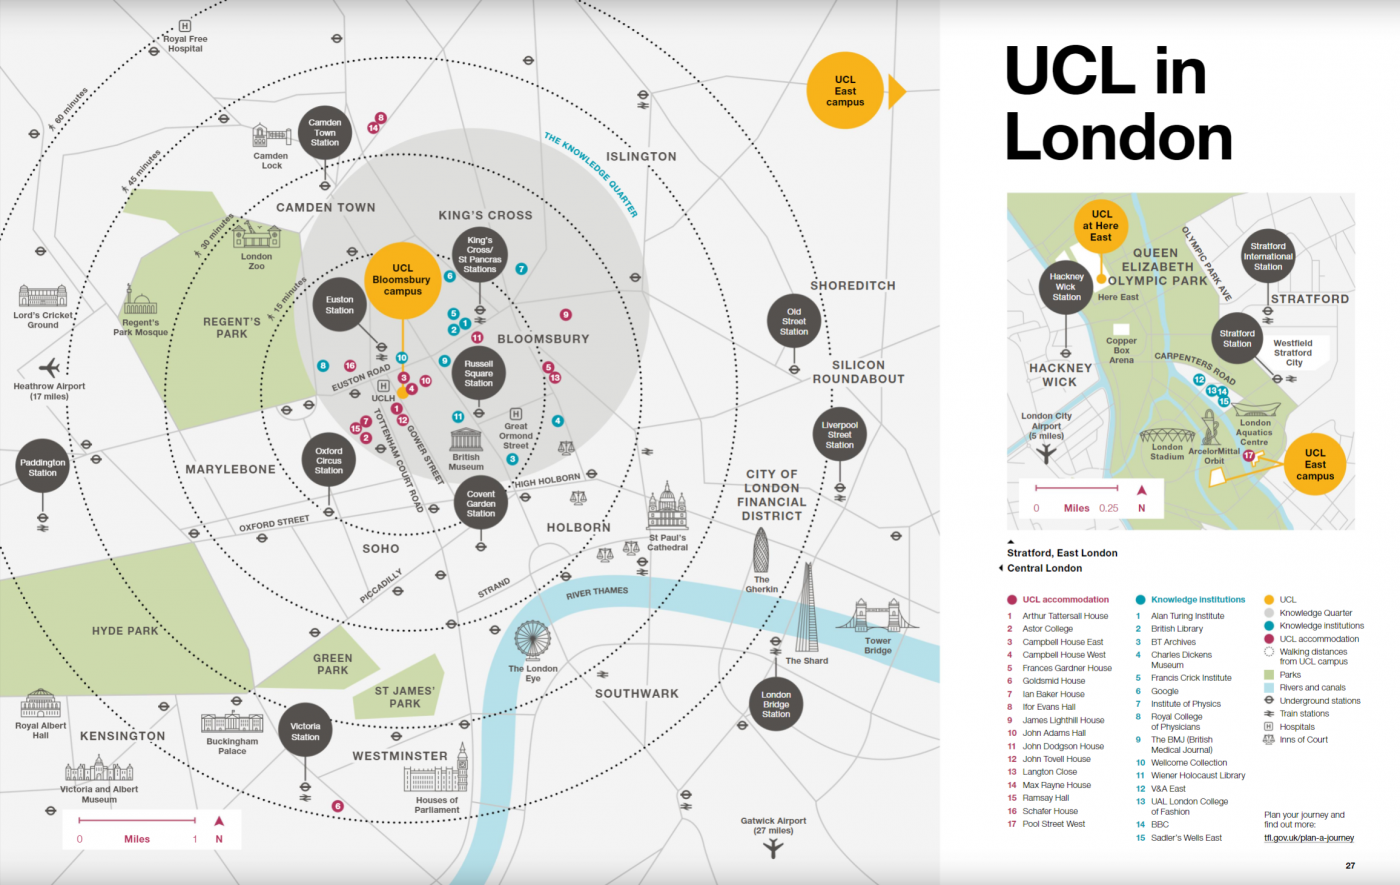 UCL in London - simplified map